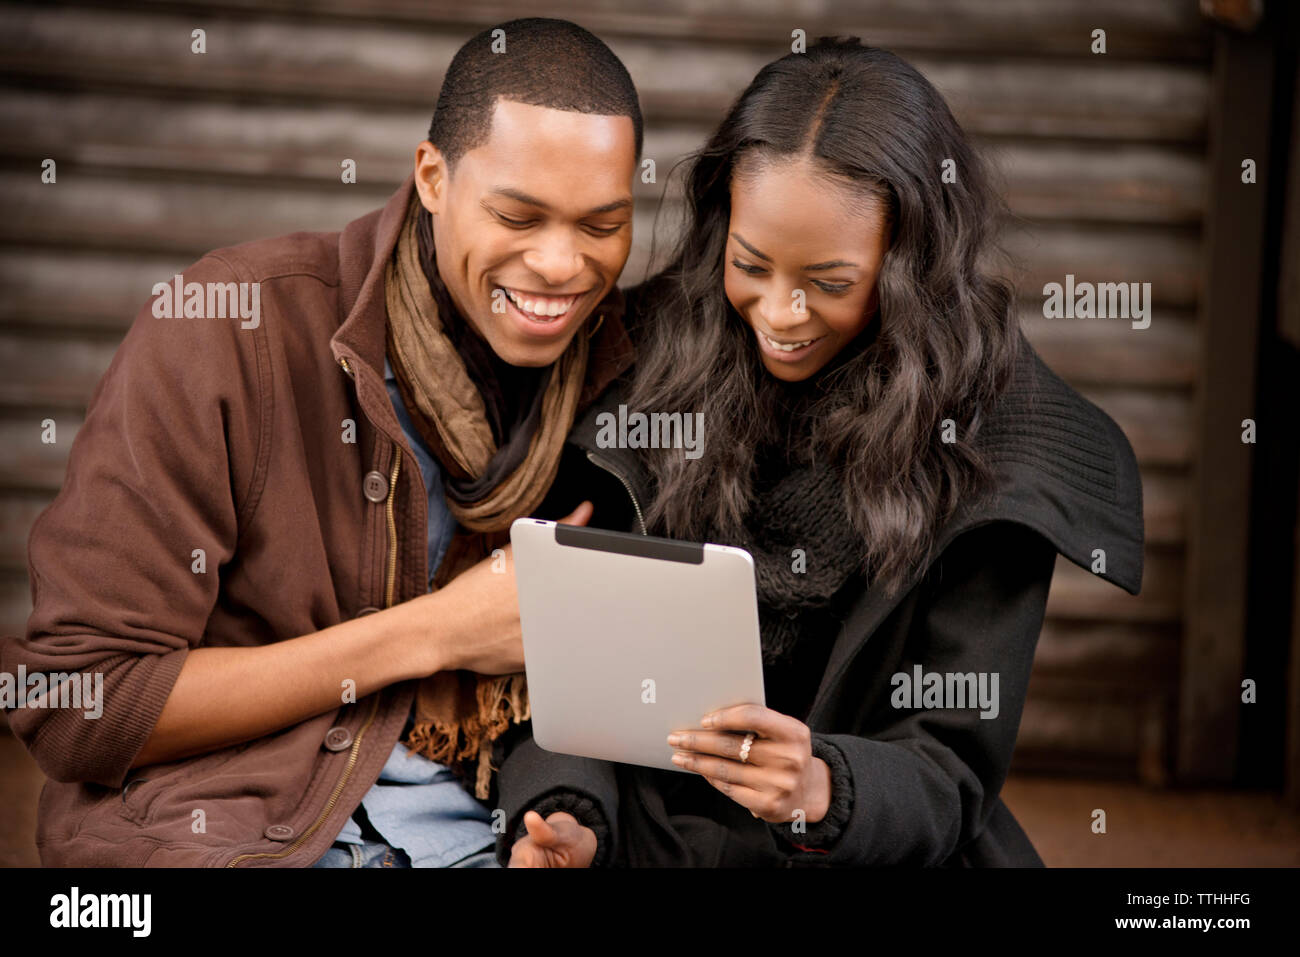 Happy couple looking at digital tablet Banque D'Images